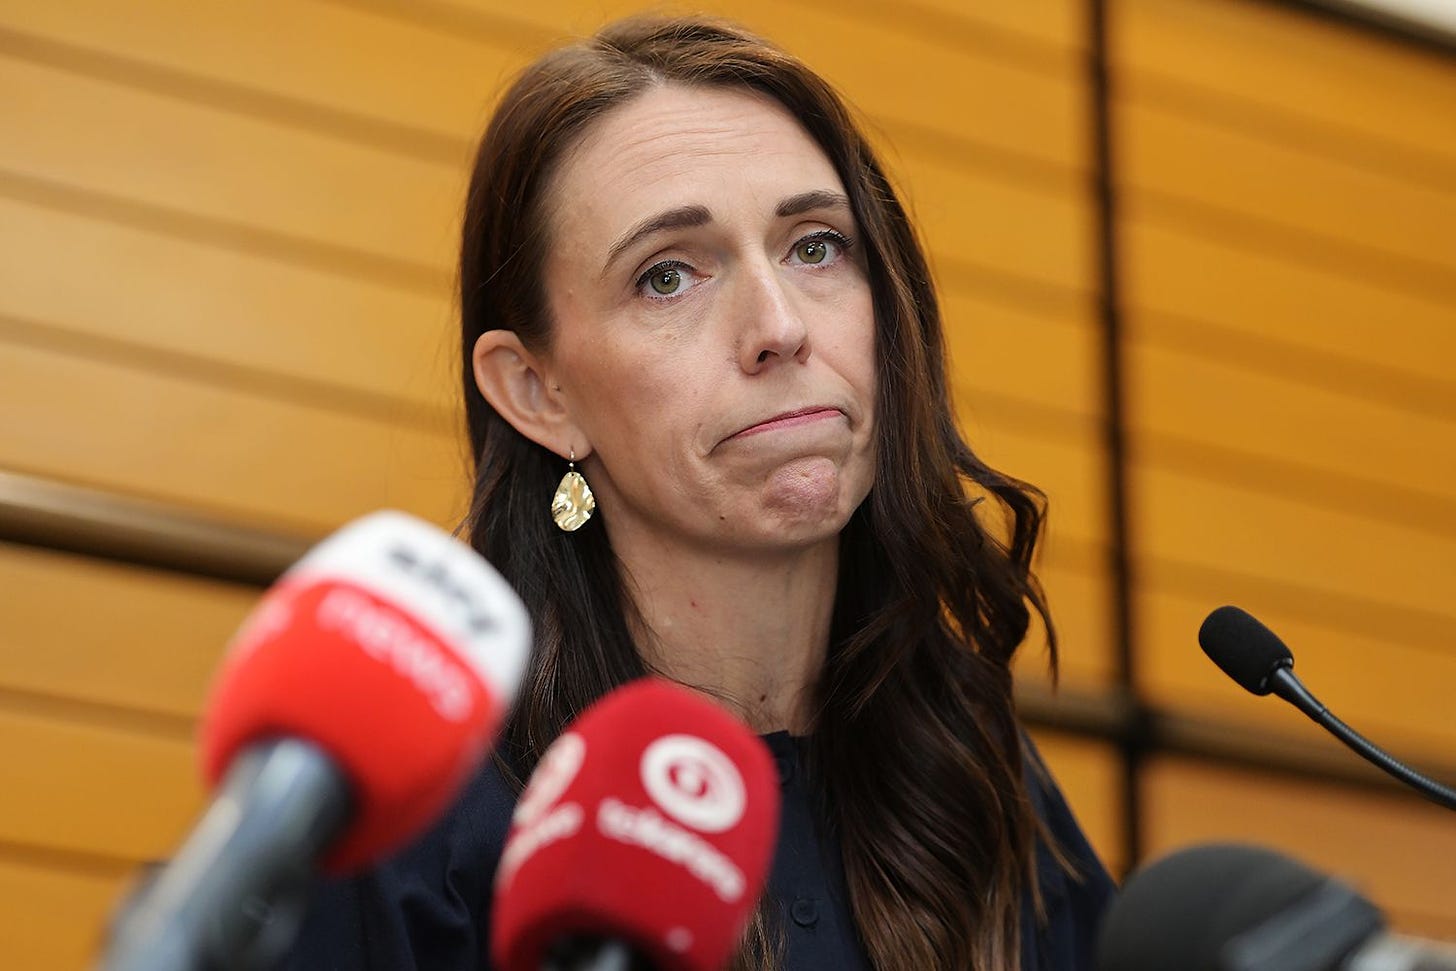 Jacinda Ardern Resigns as New Zealand's Prime Minister